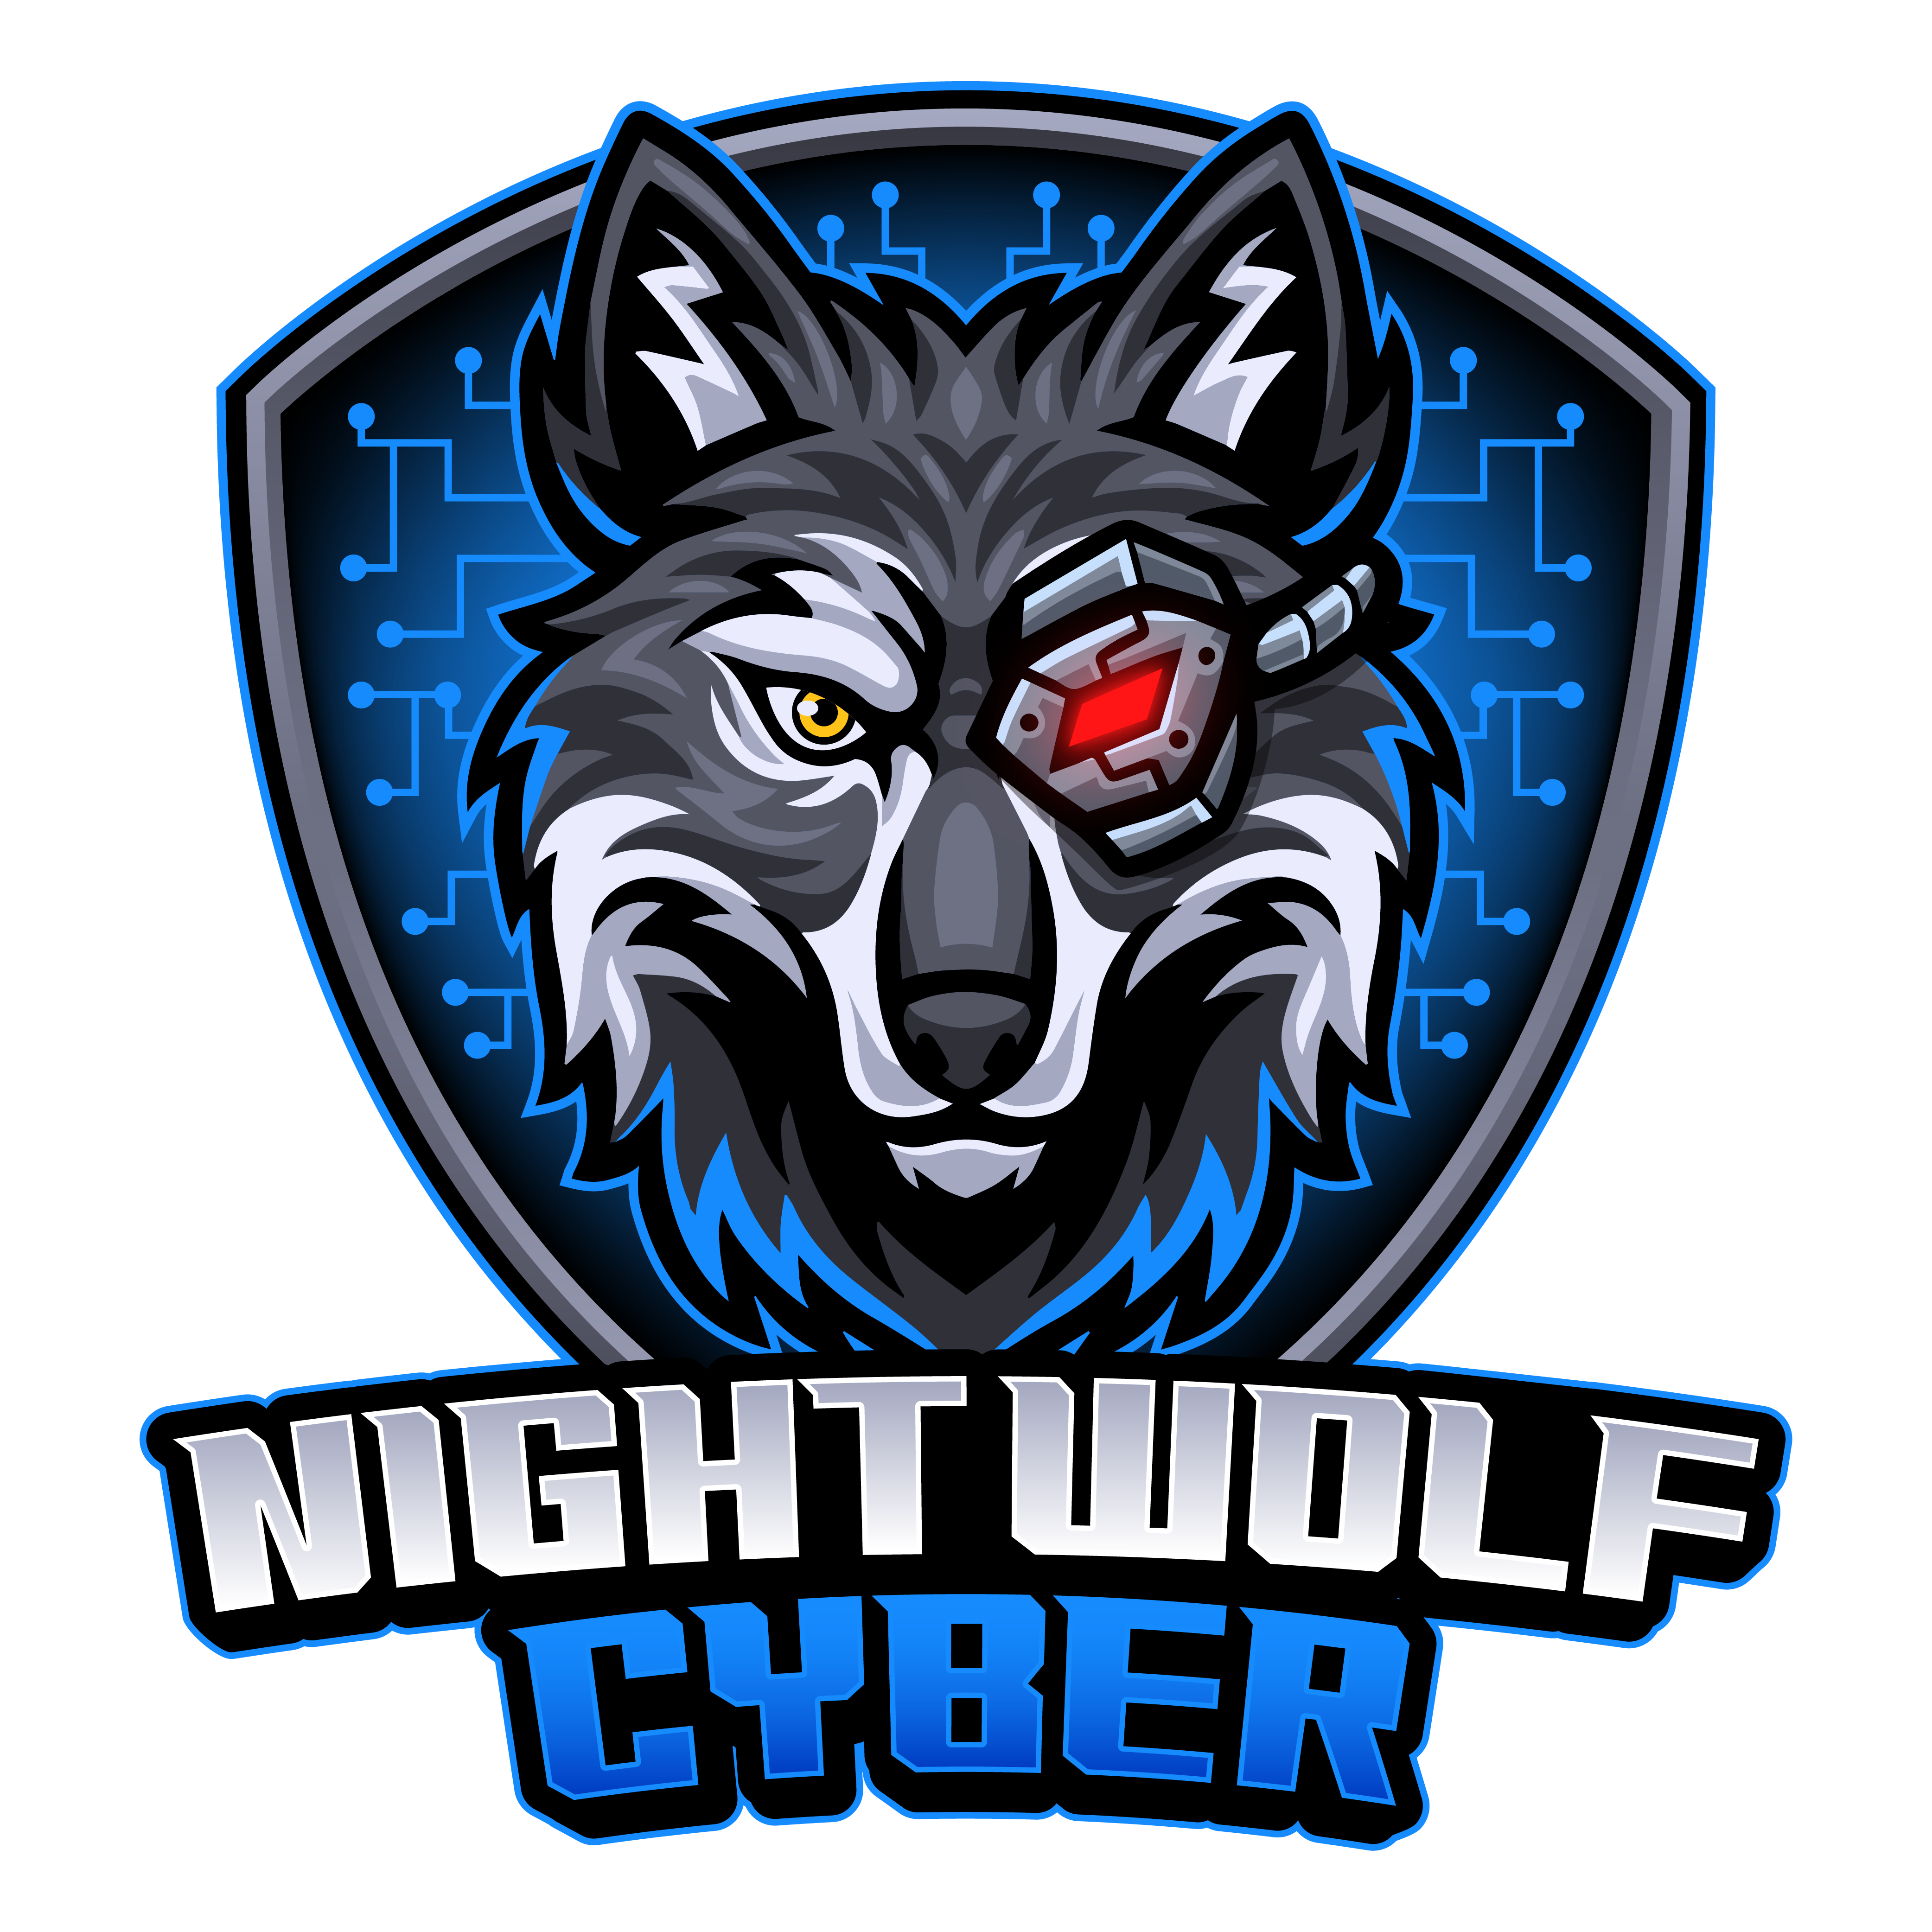 Our Plans - NightWolf Cyber